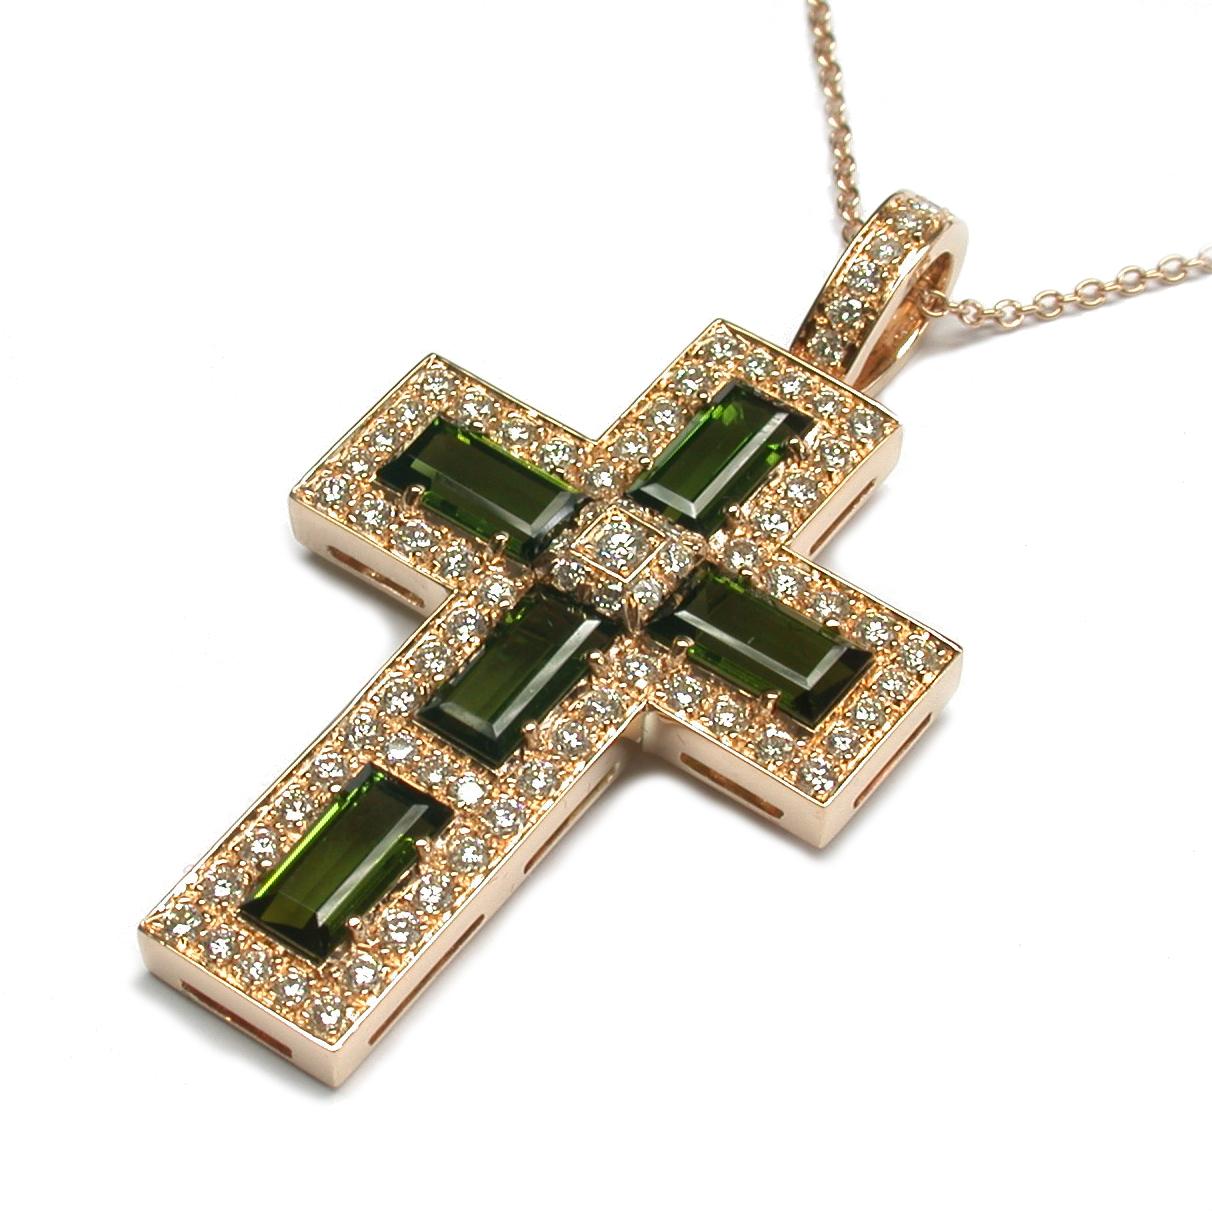 Gilberto Cassola 18Kt Rose Gold Cross Pendant with Green Tourmaline Baguettes and White Diamonds.
Handmade in our Atelier in Valenza Italy.
This Piece comes with a 46 cm 18Kt rose Gold Chain.
A Modern and Stylish Cross for an everyday use.
G Color